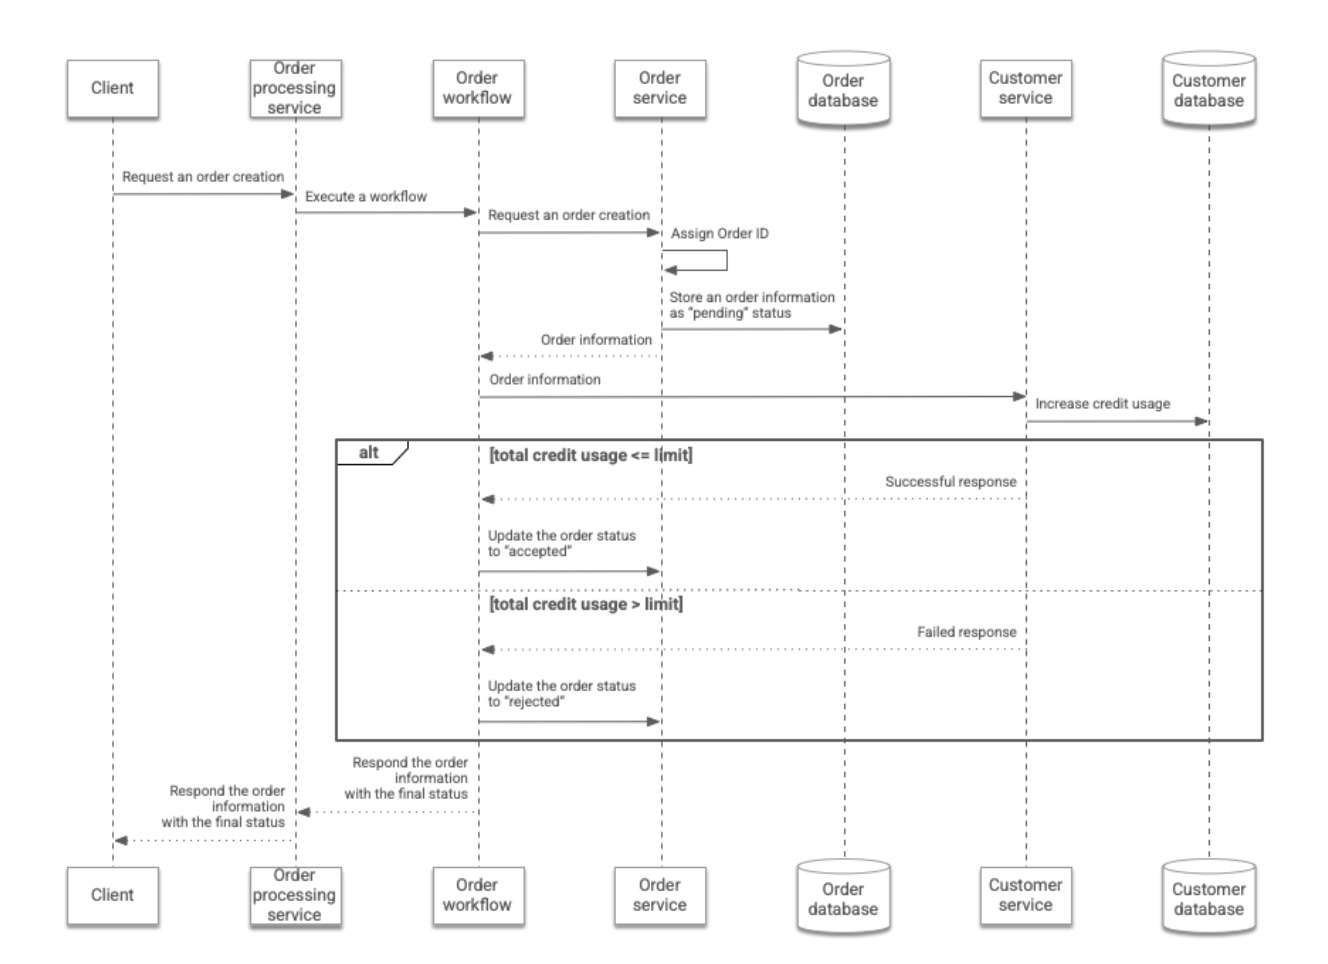 Sequence diagram of the Synchronous orchestration workflow.